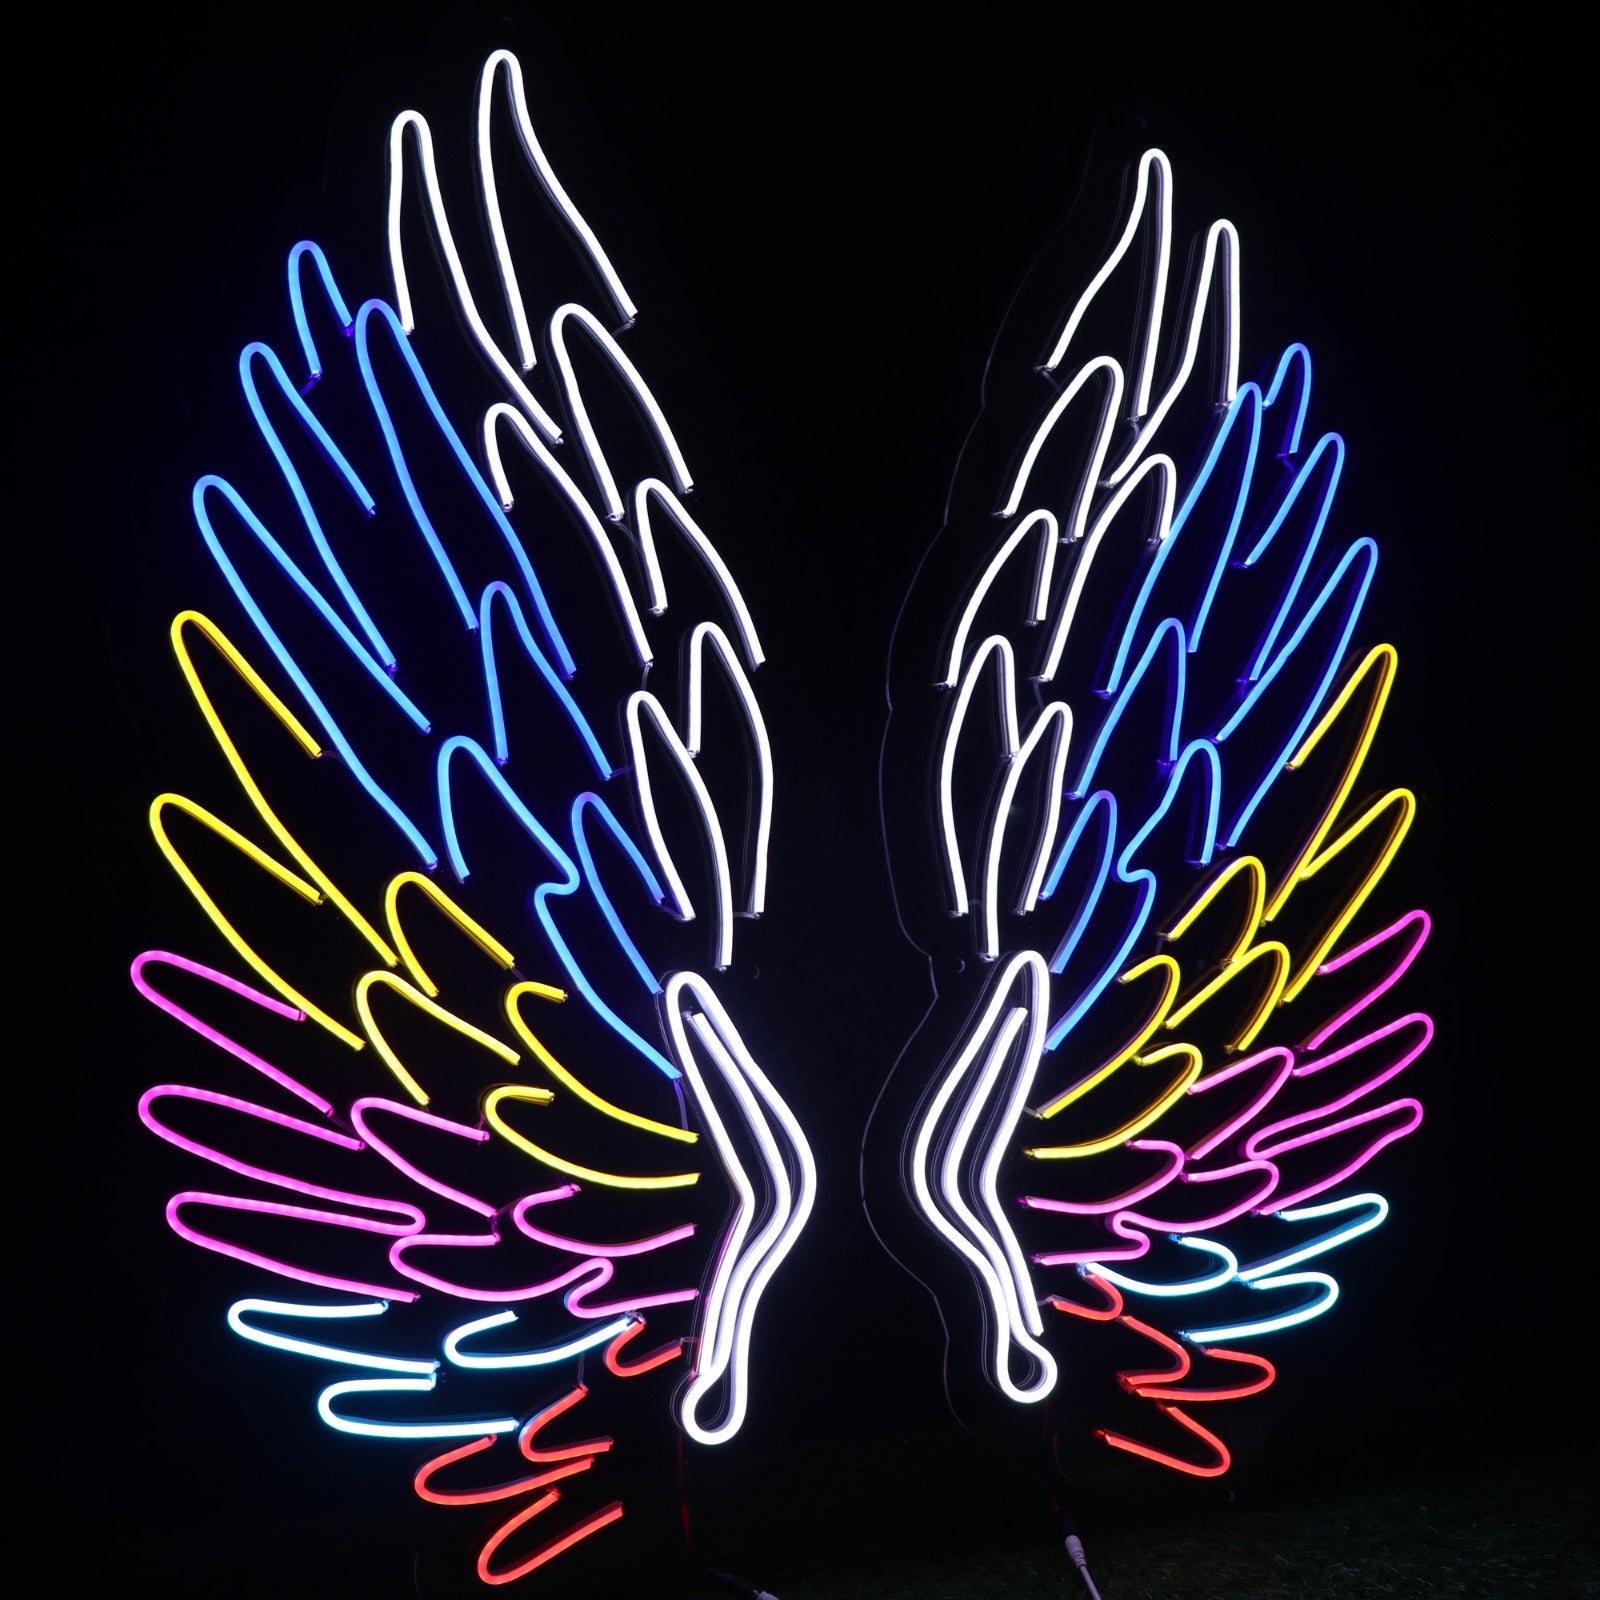 Customized led neon angel wings
led neon signs |
Custom neon sign |
led wings for wall